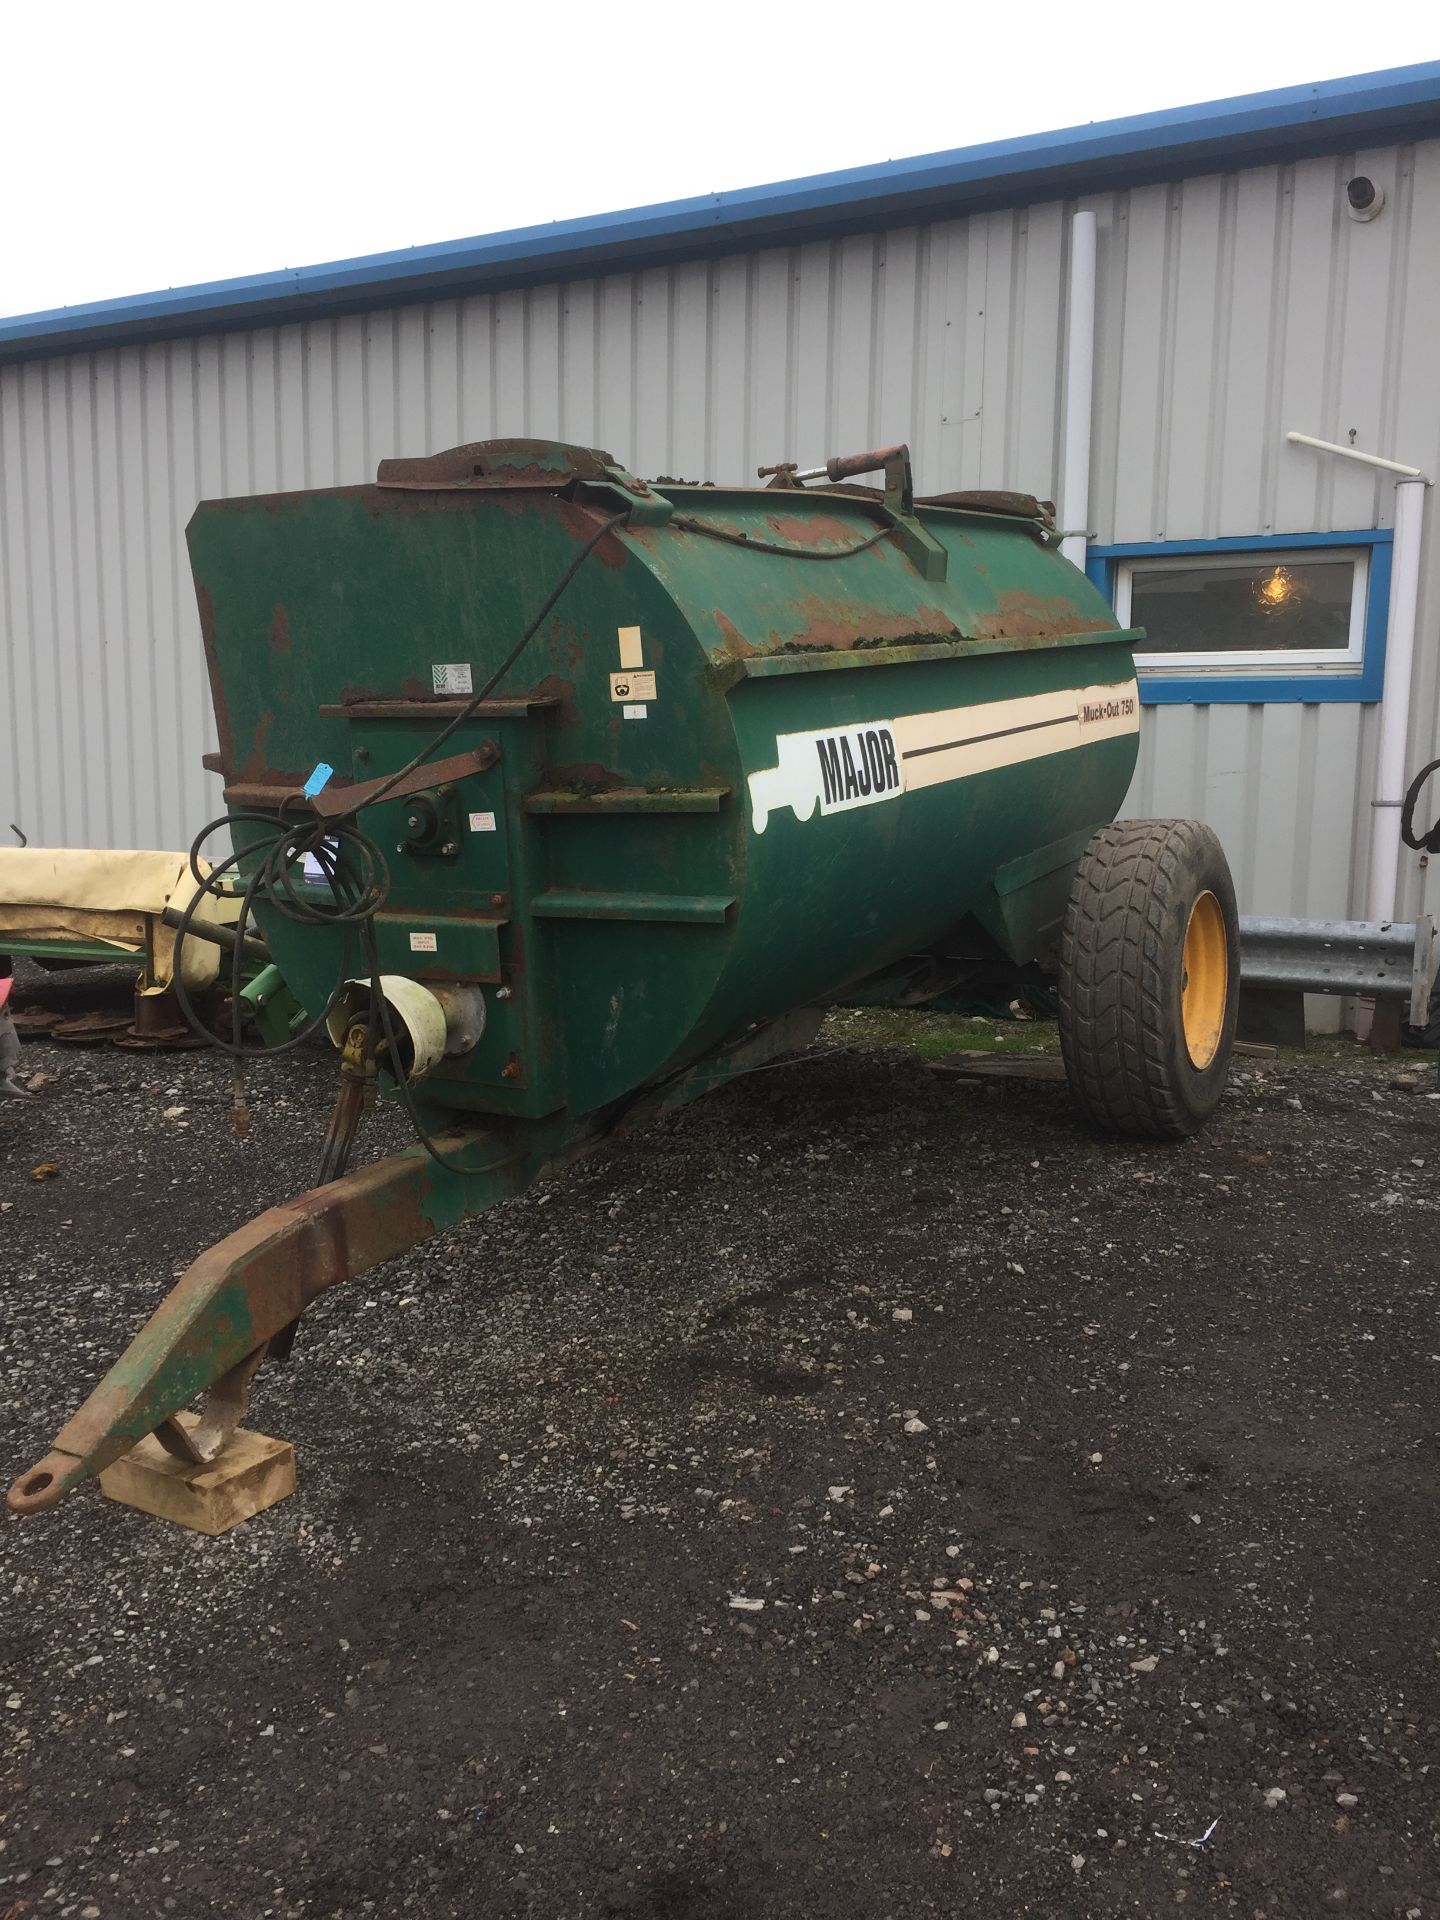 Major Muck Out 750 rotor spreader (requires new lid), Serial No. 7513 (2003)